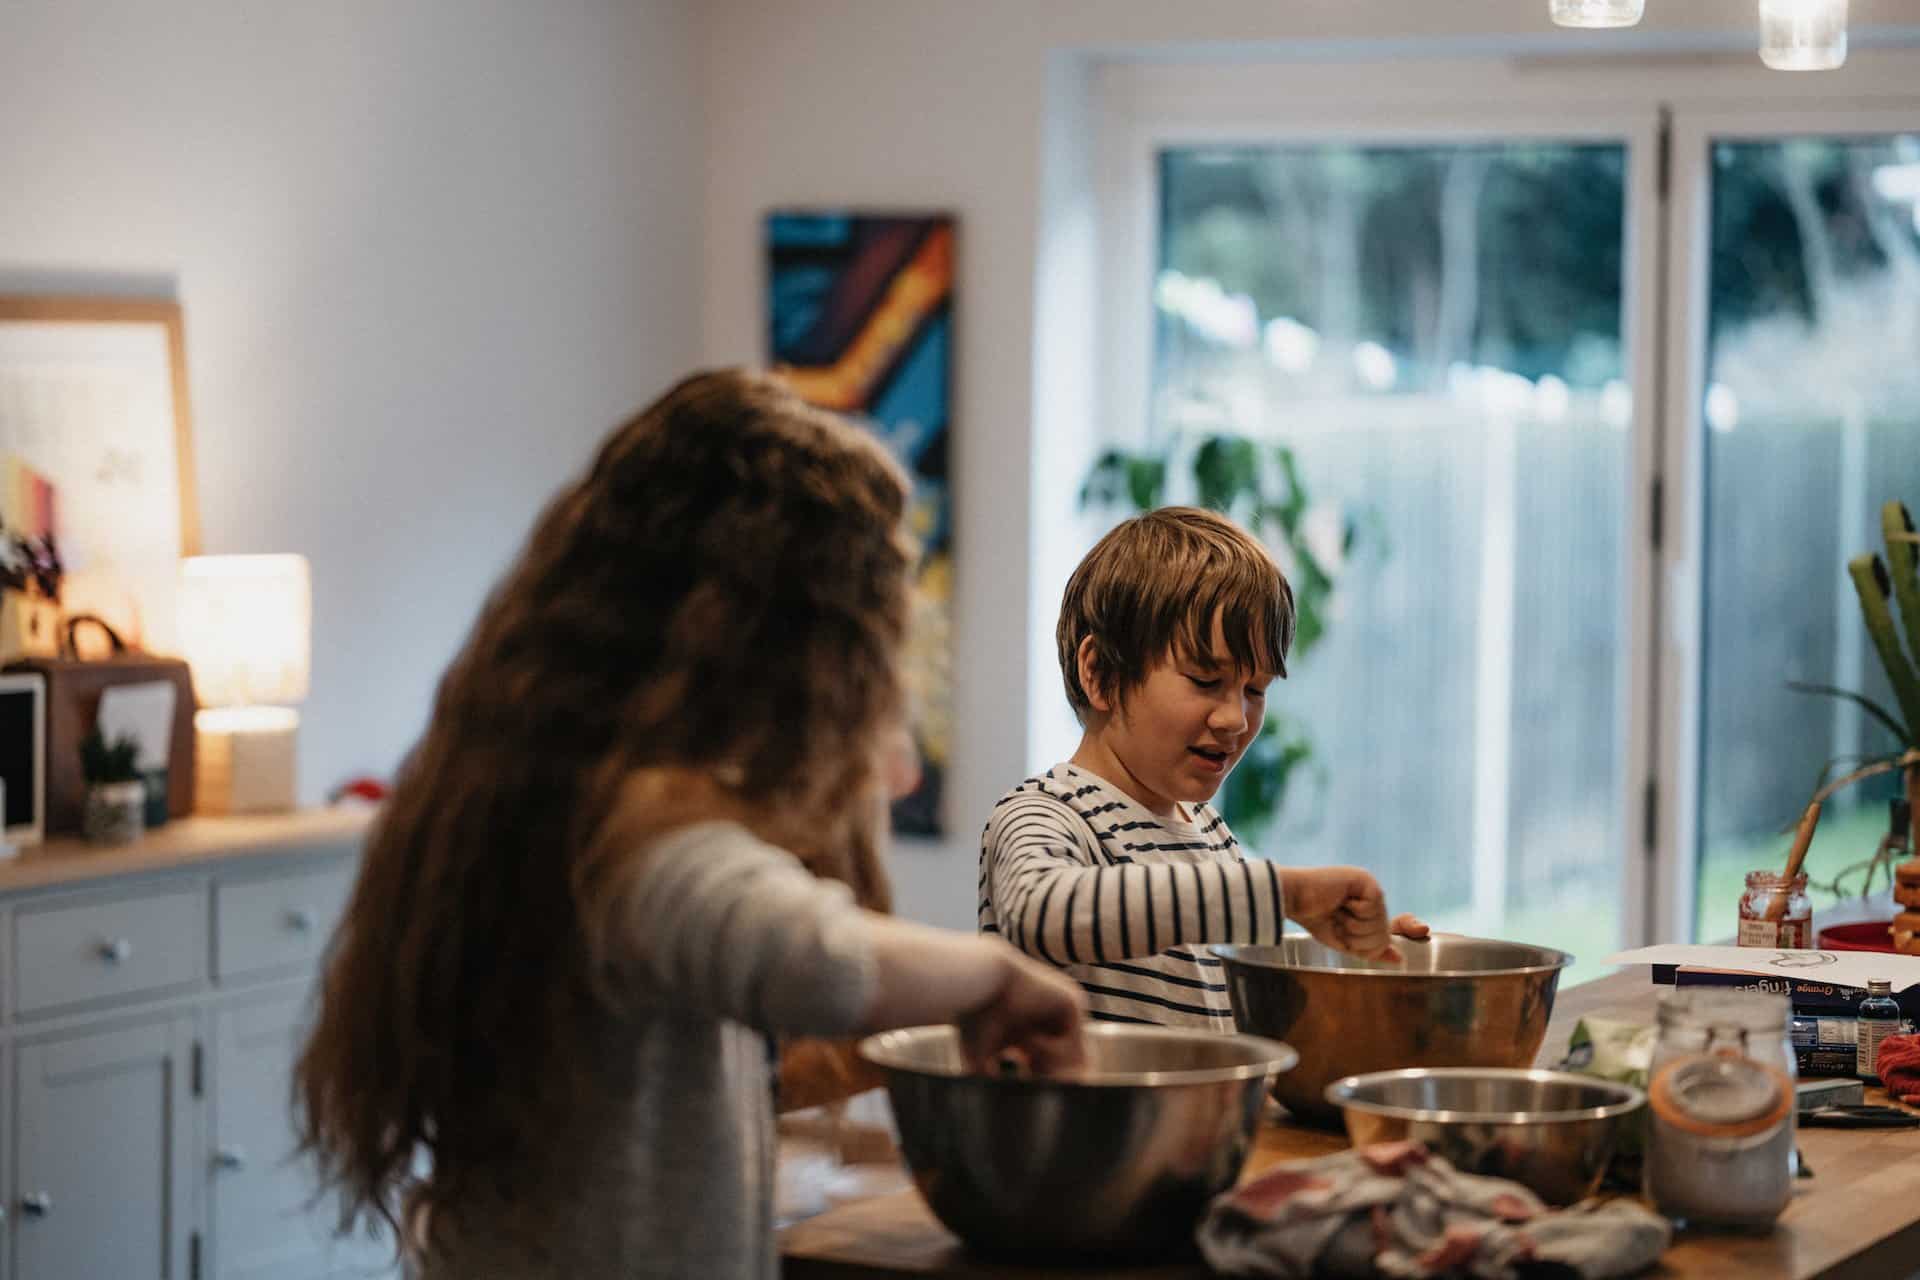 Kids cooking a meal for mom as a Mother's day gift